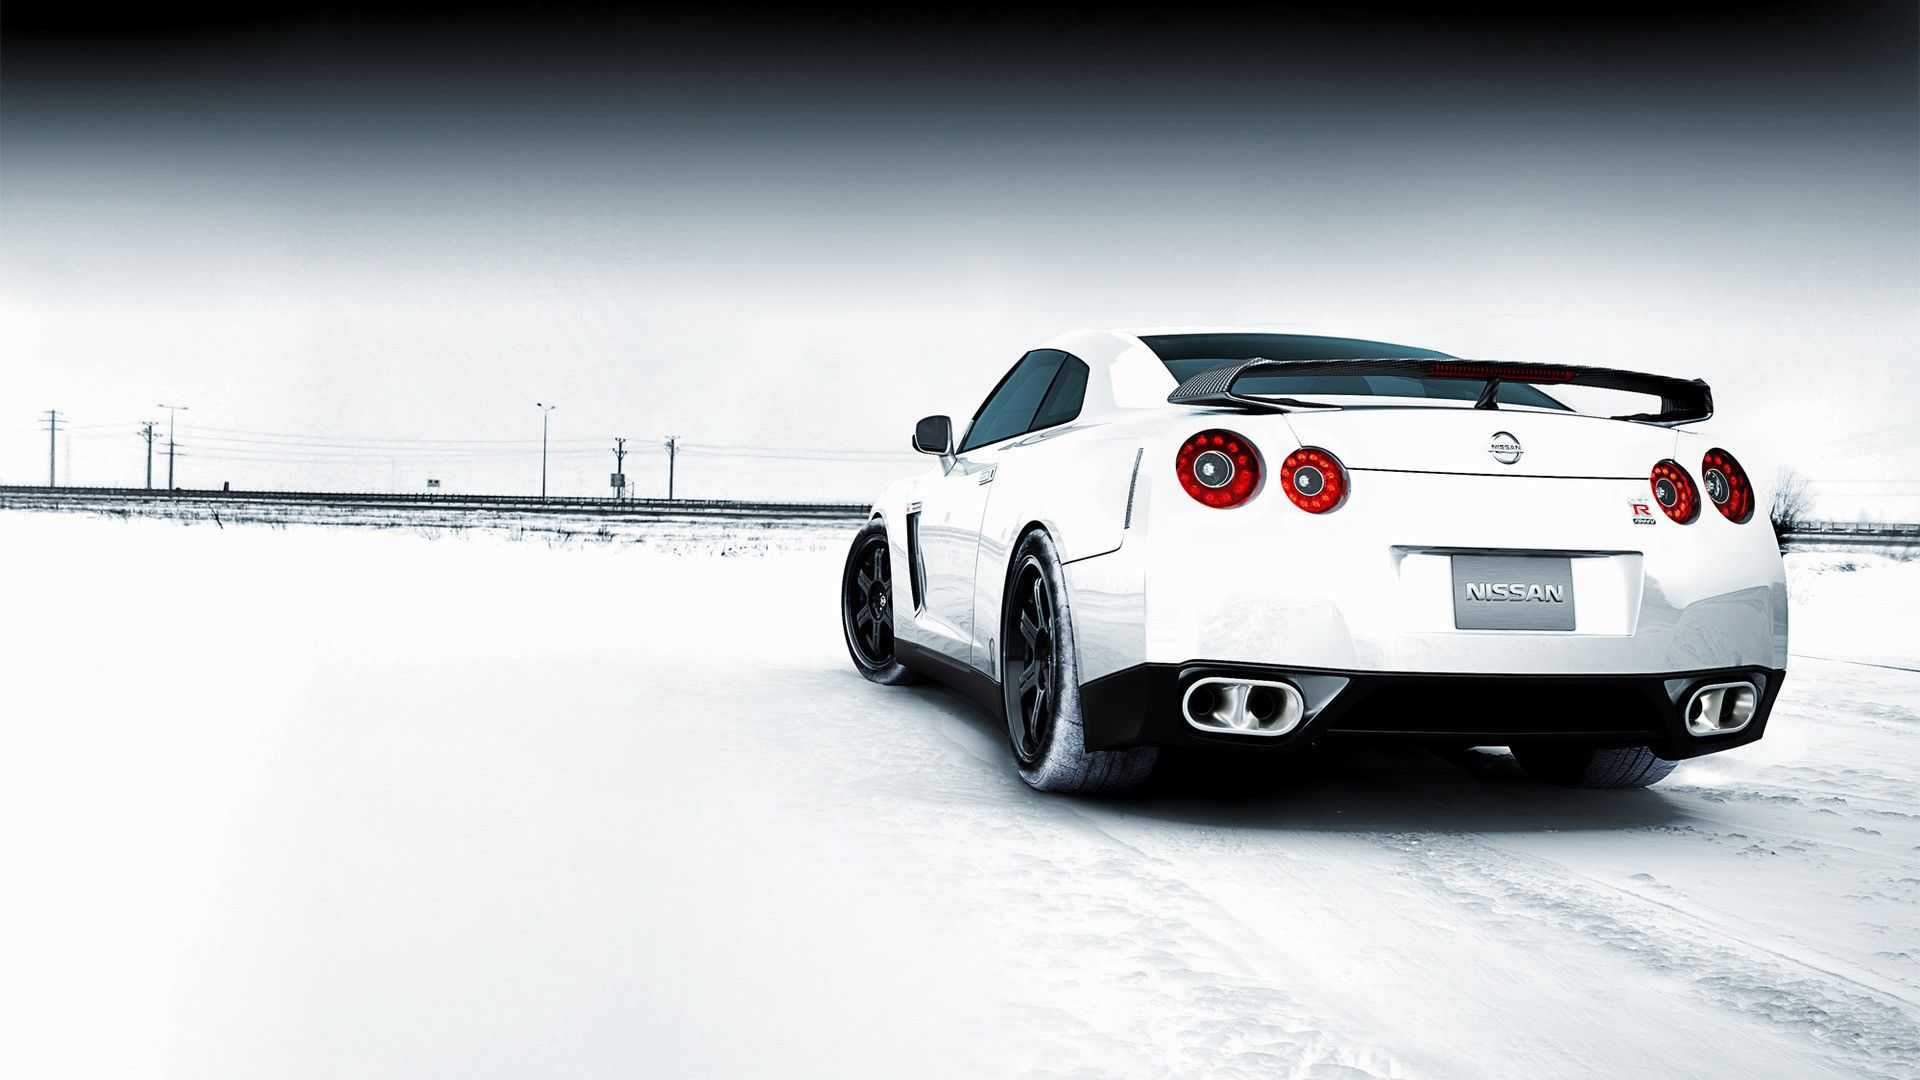 car, Snow, Nissan, Nissan GT R, Supercars, White Cars Wallpaper HD / Desktop and Mobile Background